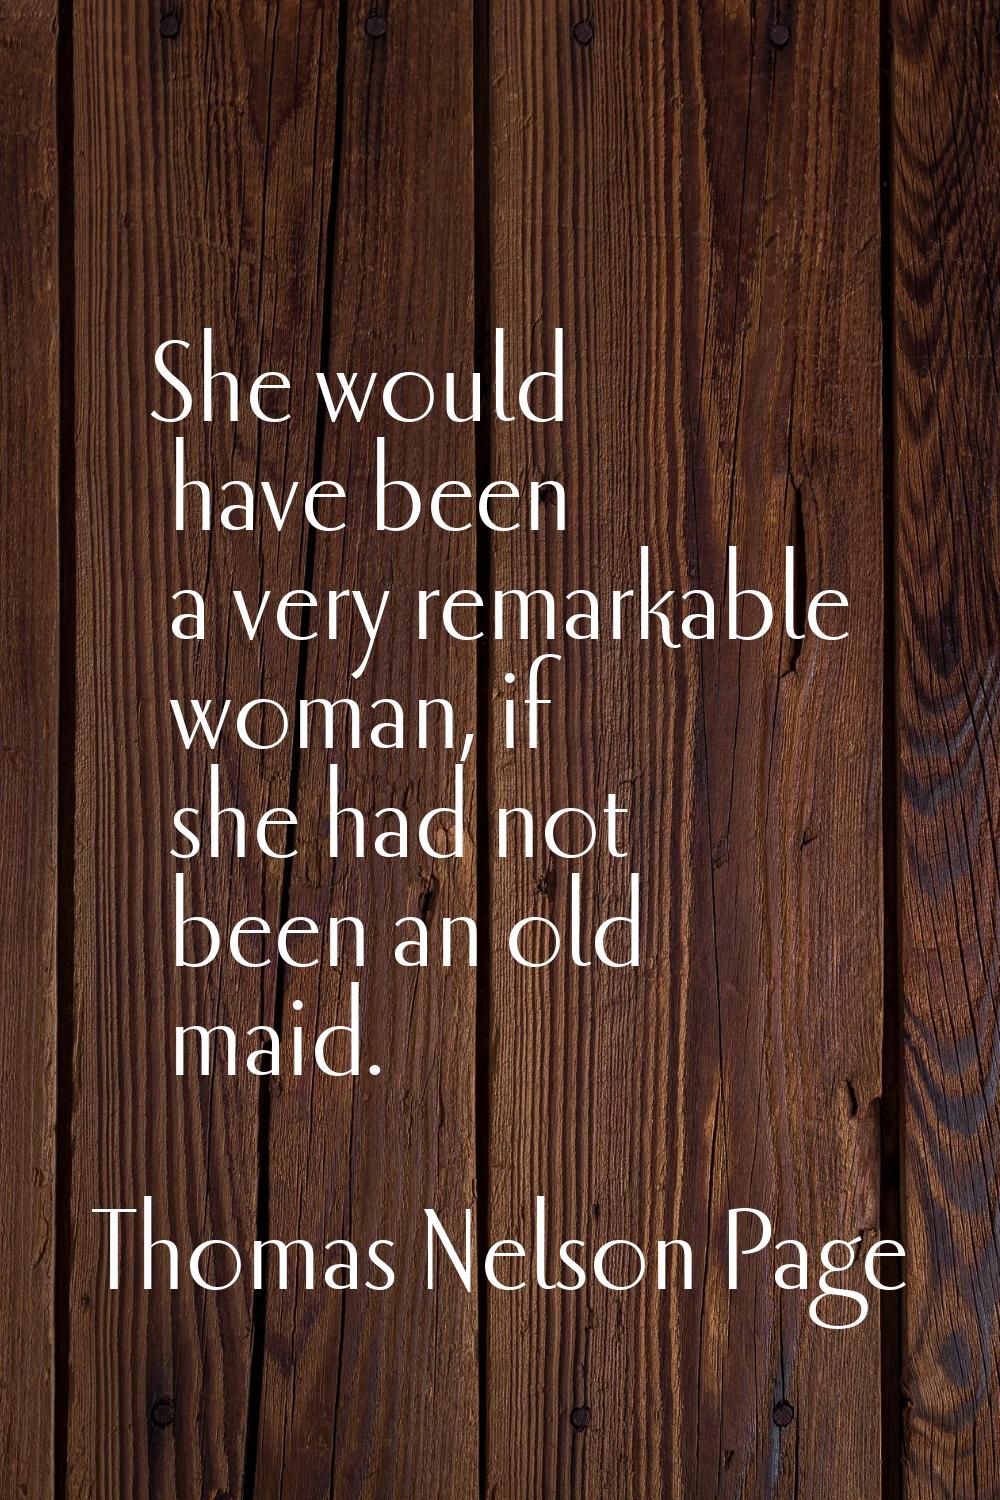 She would have been a very remarkable woman, if she had not been an old maid.